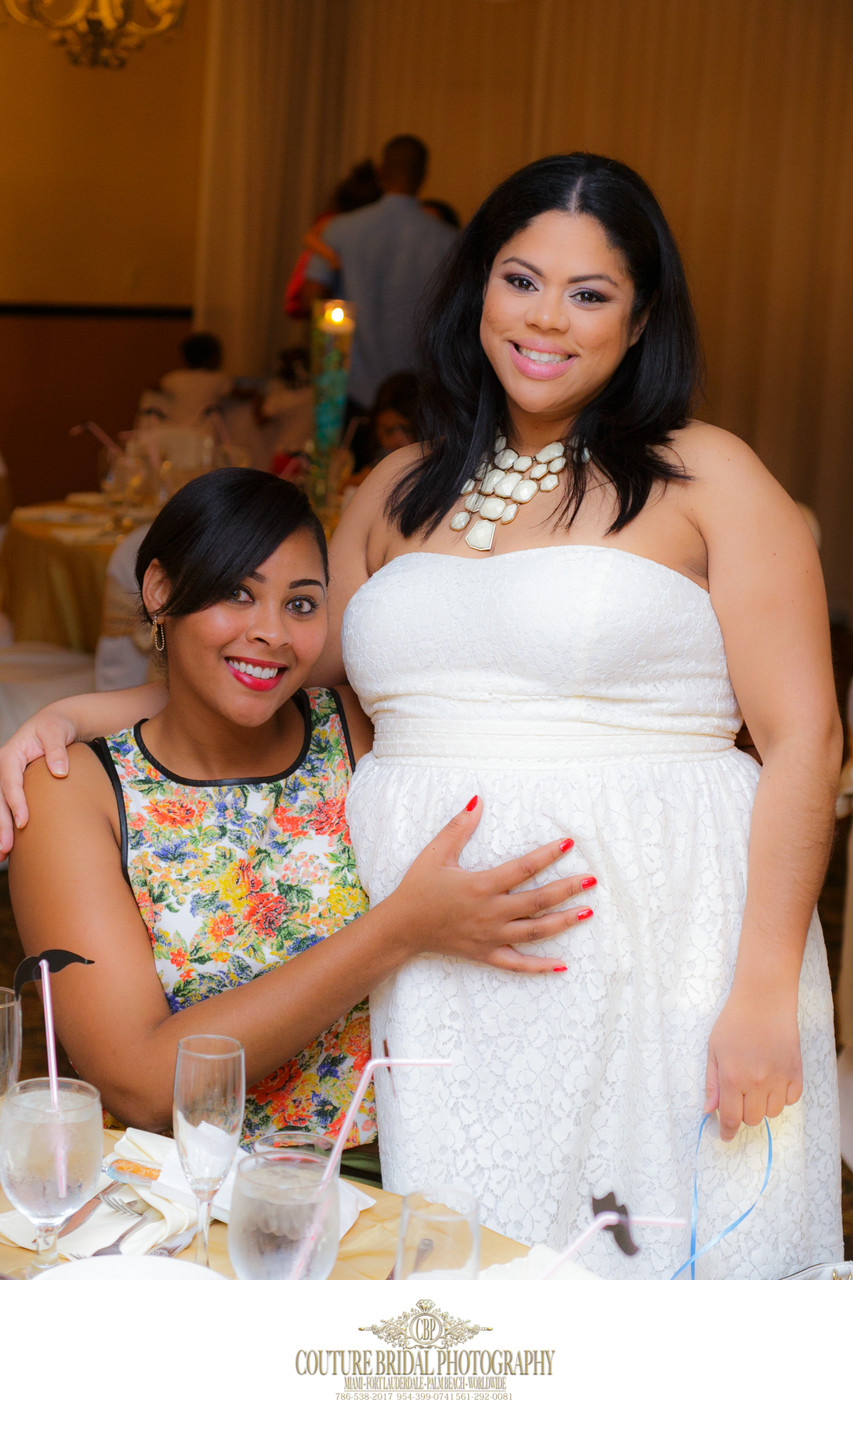 BABY SHOWER EVENT AND PORTRAIT PHOTOGRAPHY MIAMI 